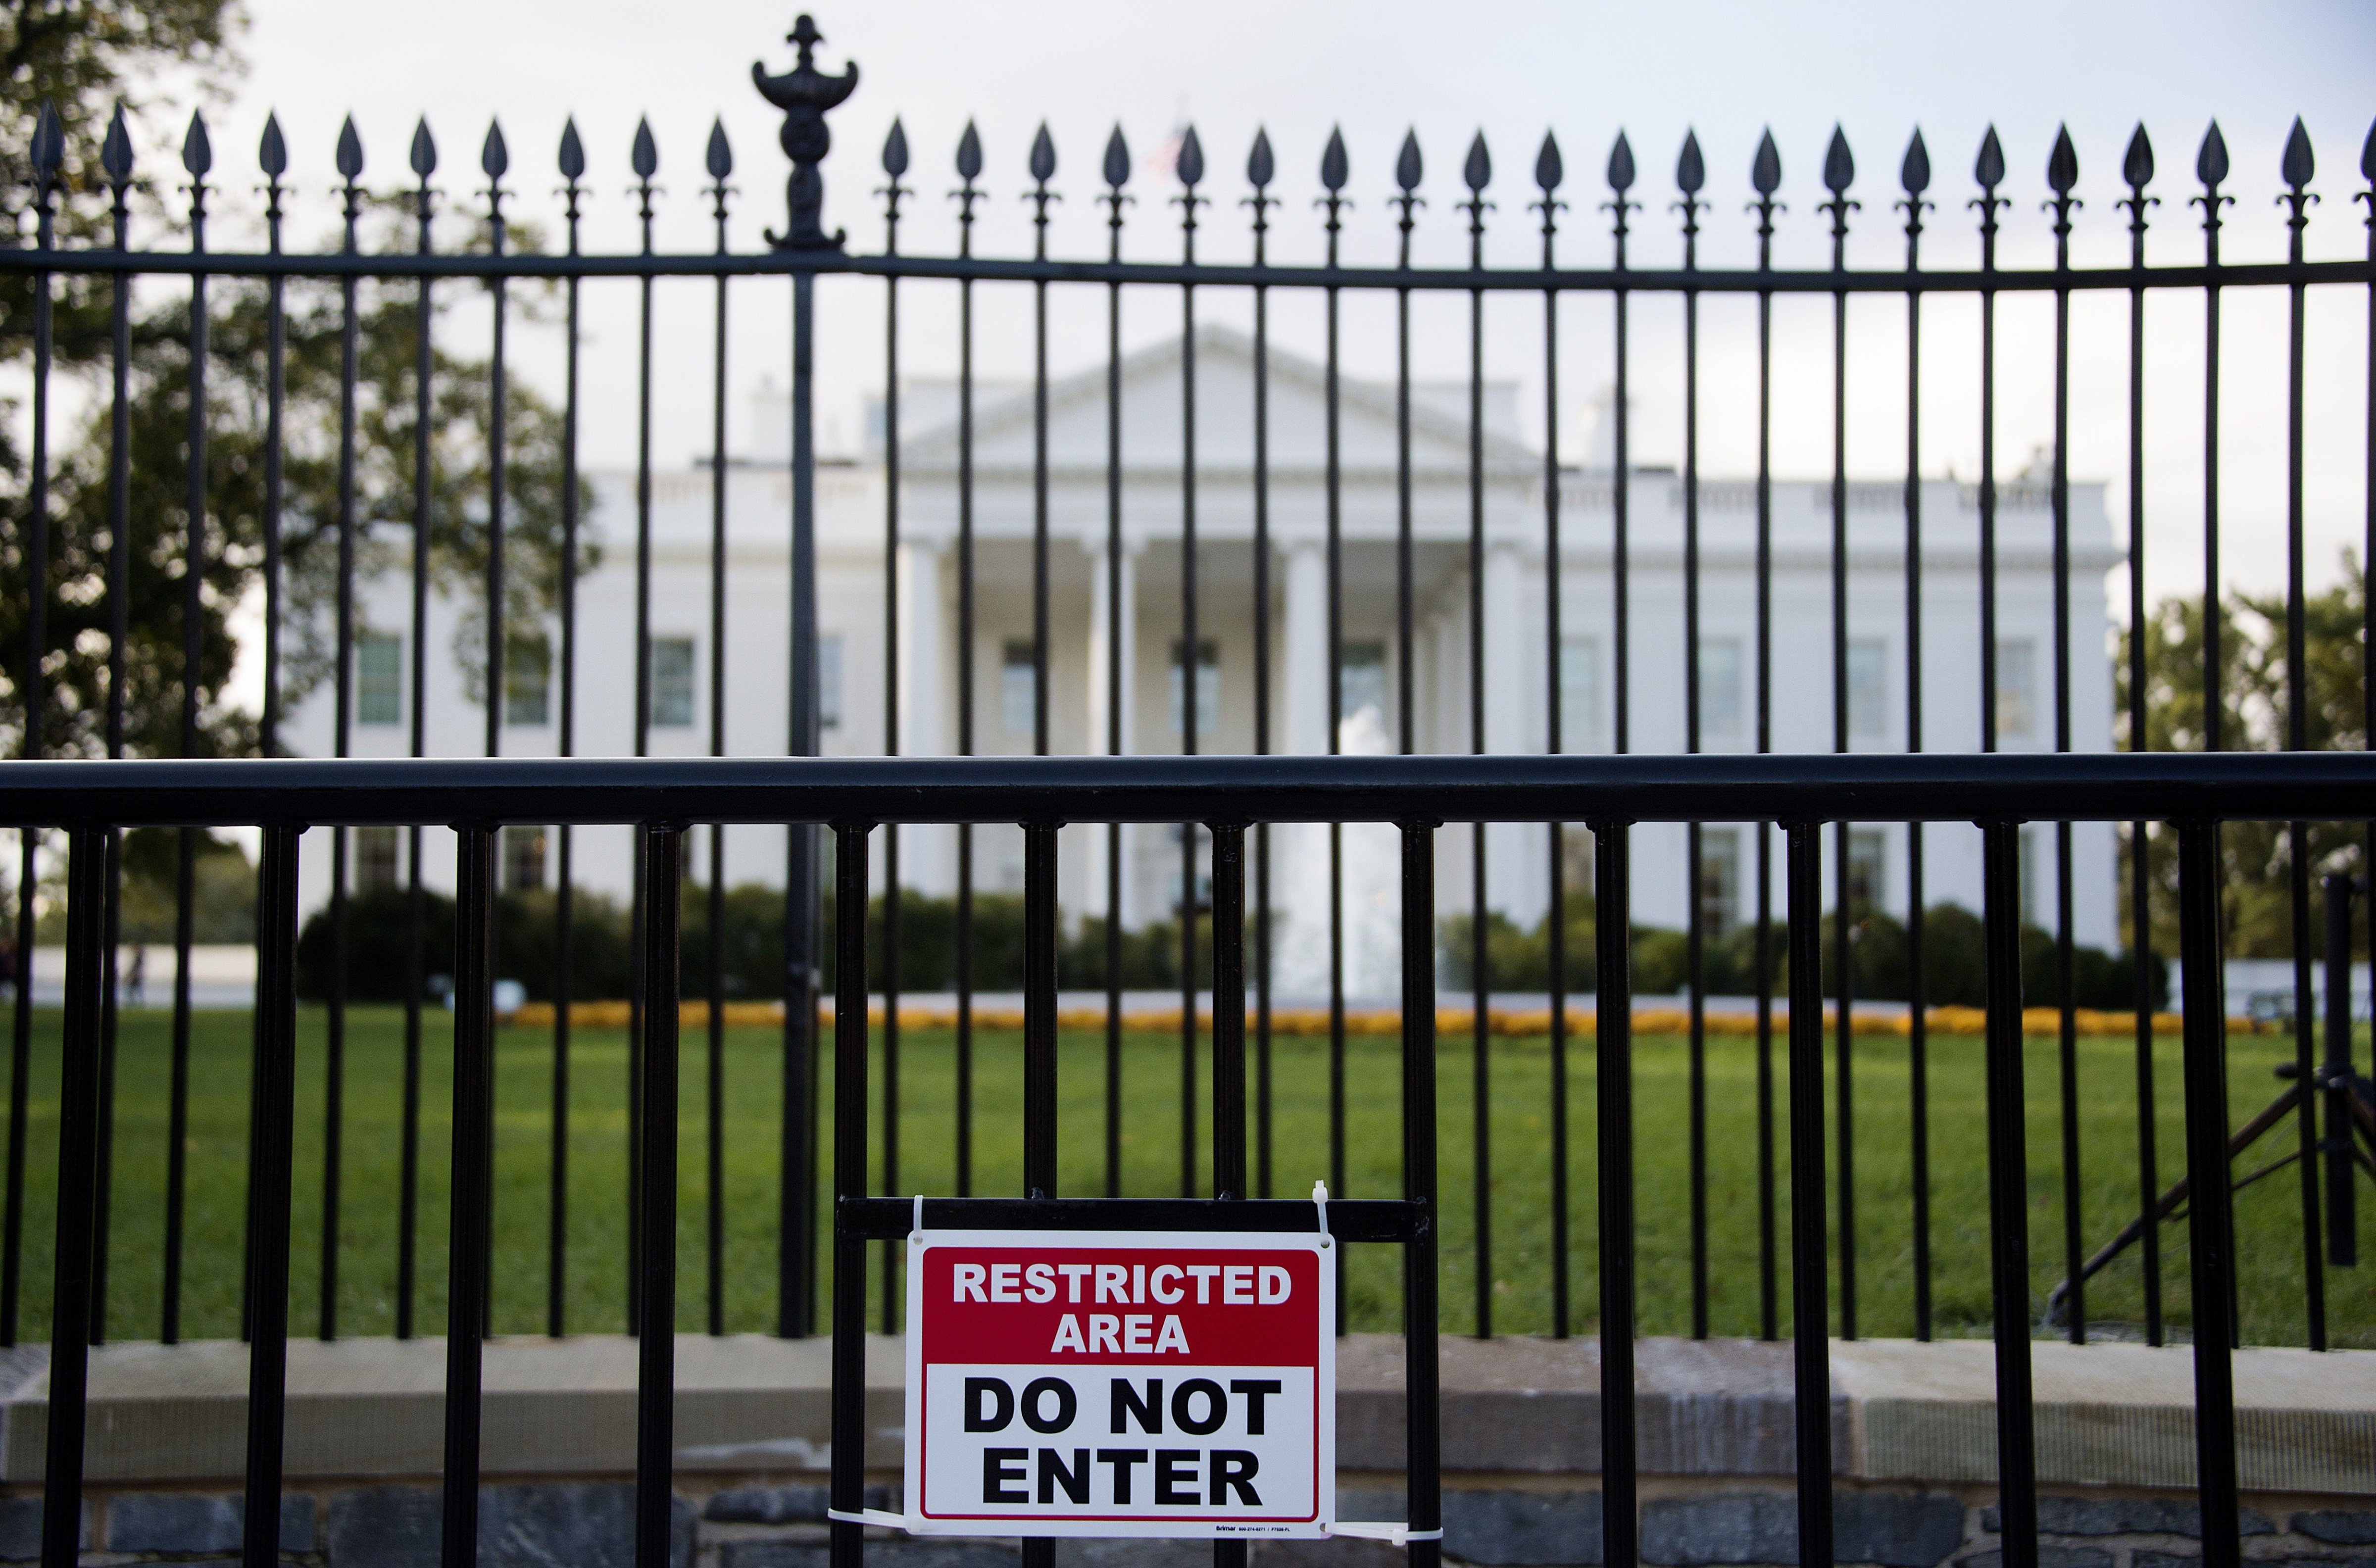 A sign warning of a restricted area is posted on the temporary barricade in front of the fence line to the White House in Washington, DC, October 23, 2014. (Jim Watson&mdash;AFP/Getty Images)